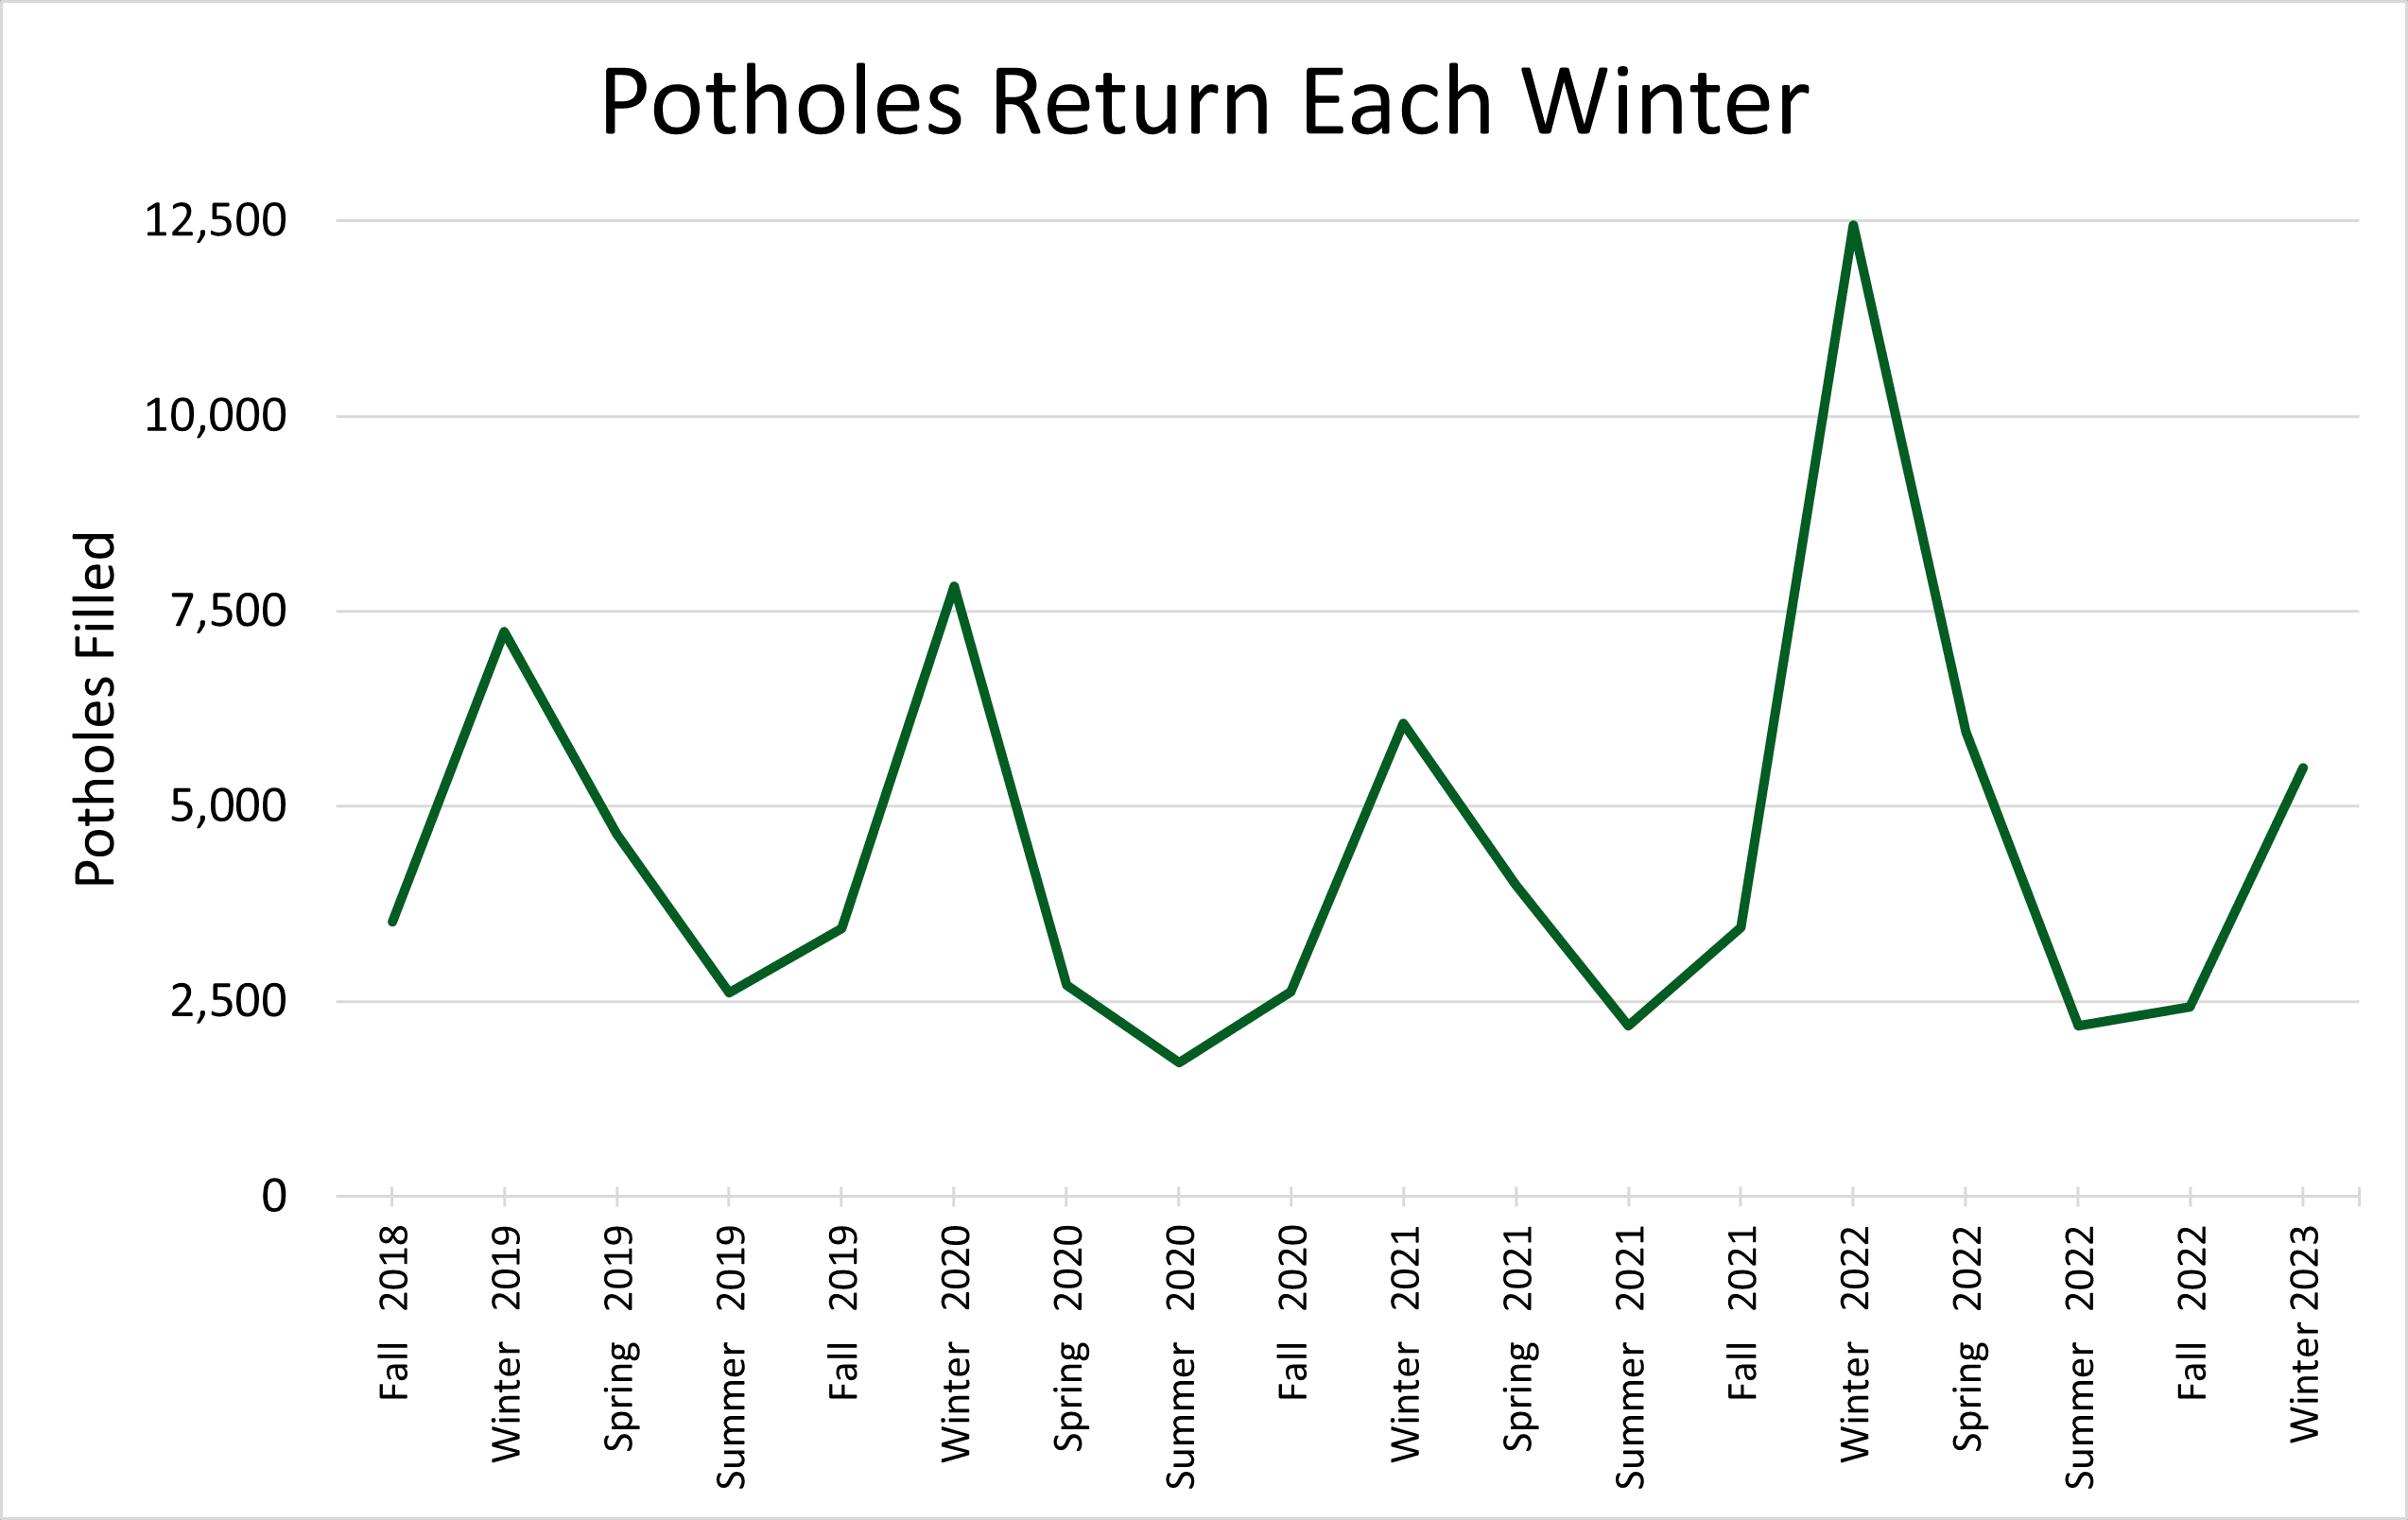 Graphic showing how potholes return each winter. The graph features several spikes in the number of potholes filled over time between Fall 2018 and Winter 2023. The spikes correspond to the wintertime season. The line graphic is green in color and spikes at a peak of 12,500 potholes filled.